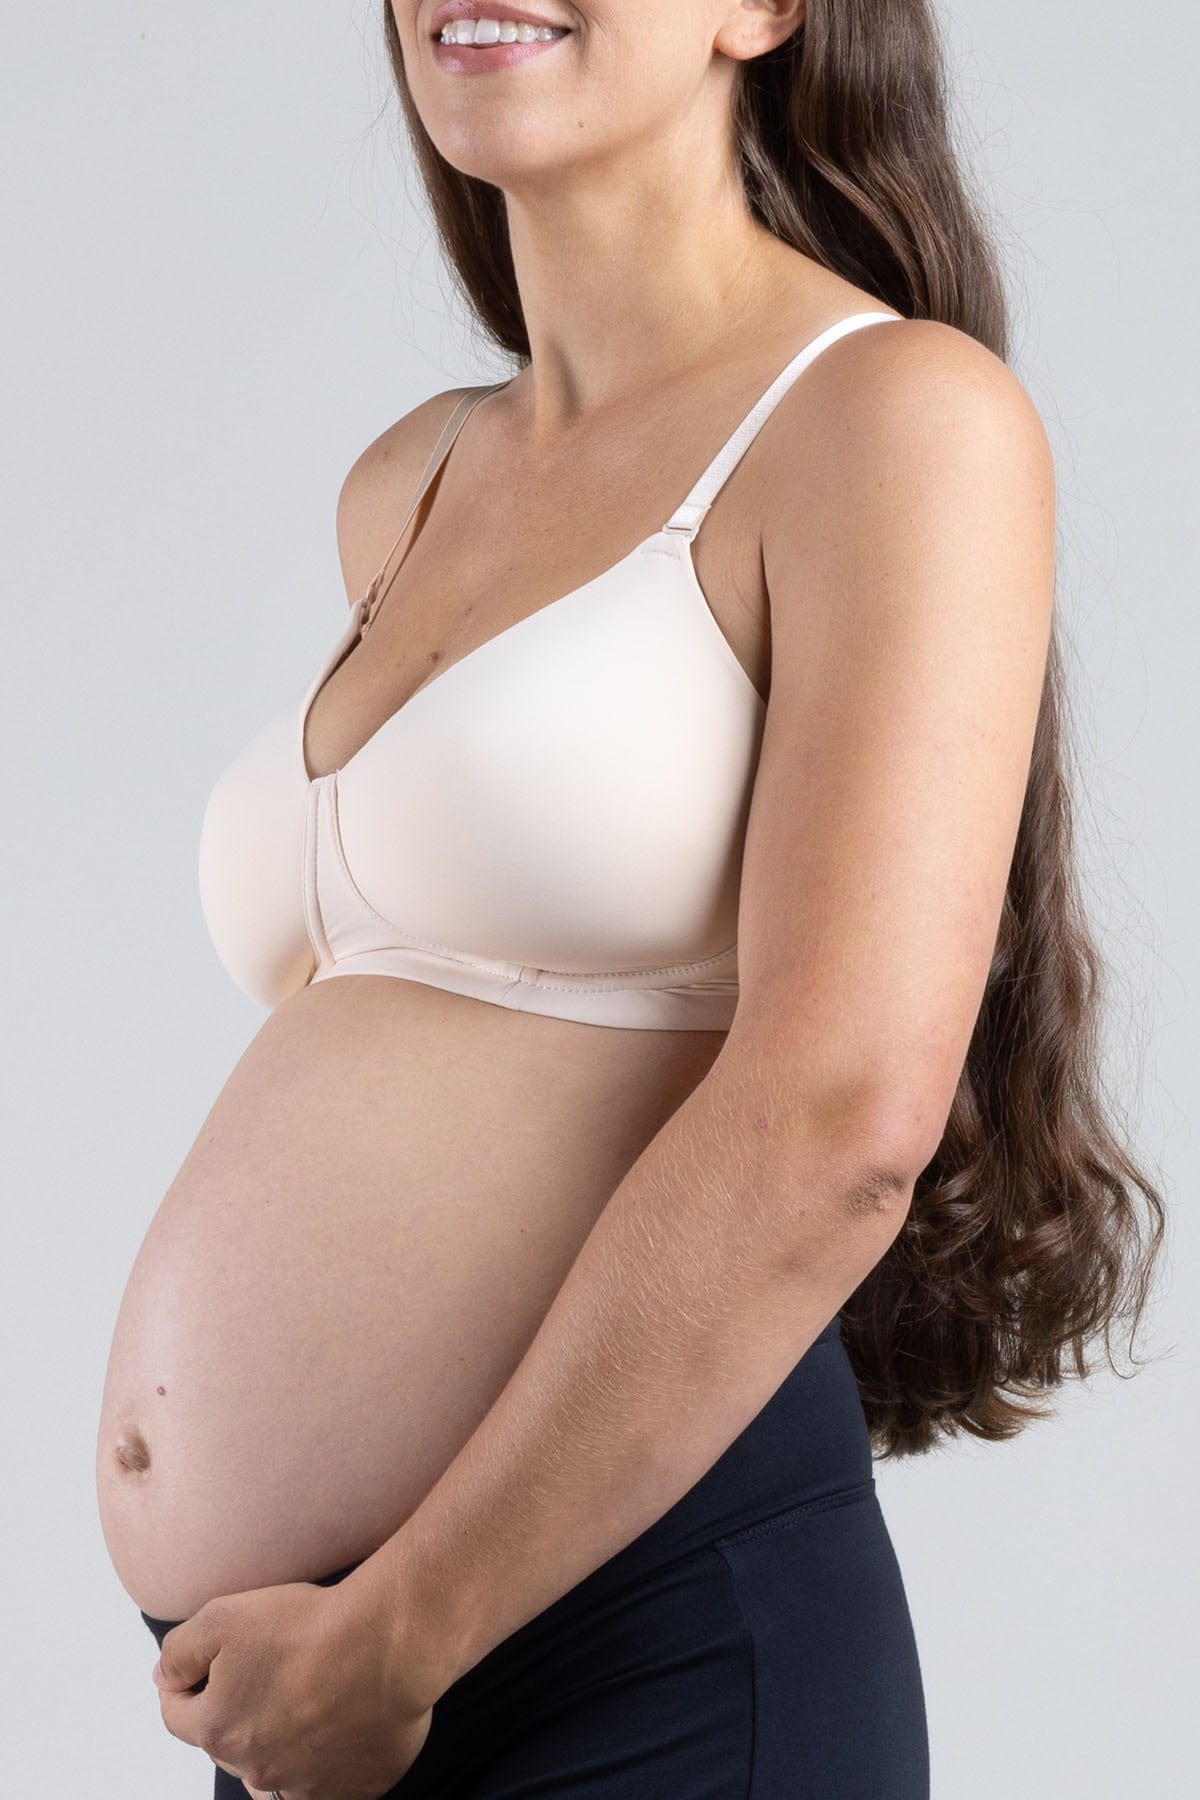 Simple Wishes Pumping and Nursing Bra in One with Fixed Padding - Patented  Supermom T-Shirt - Pumping Bra Hands Free